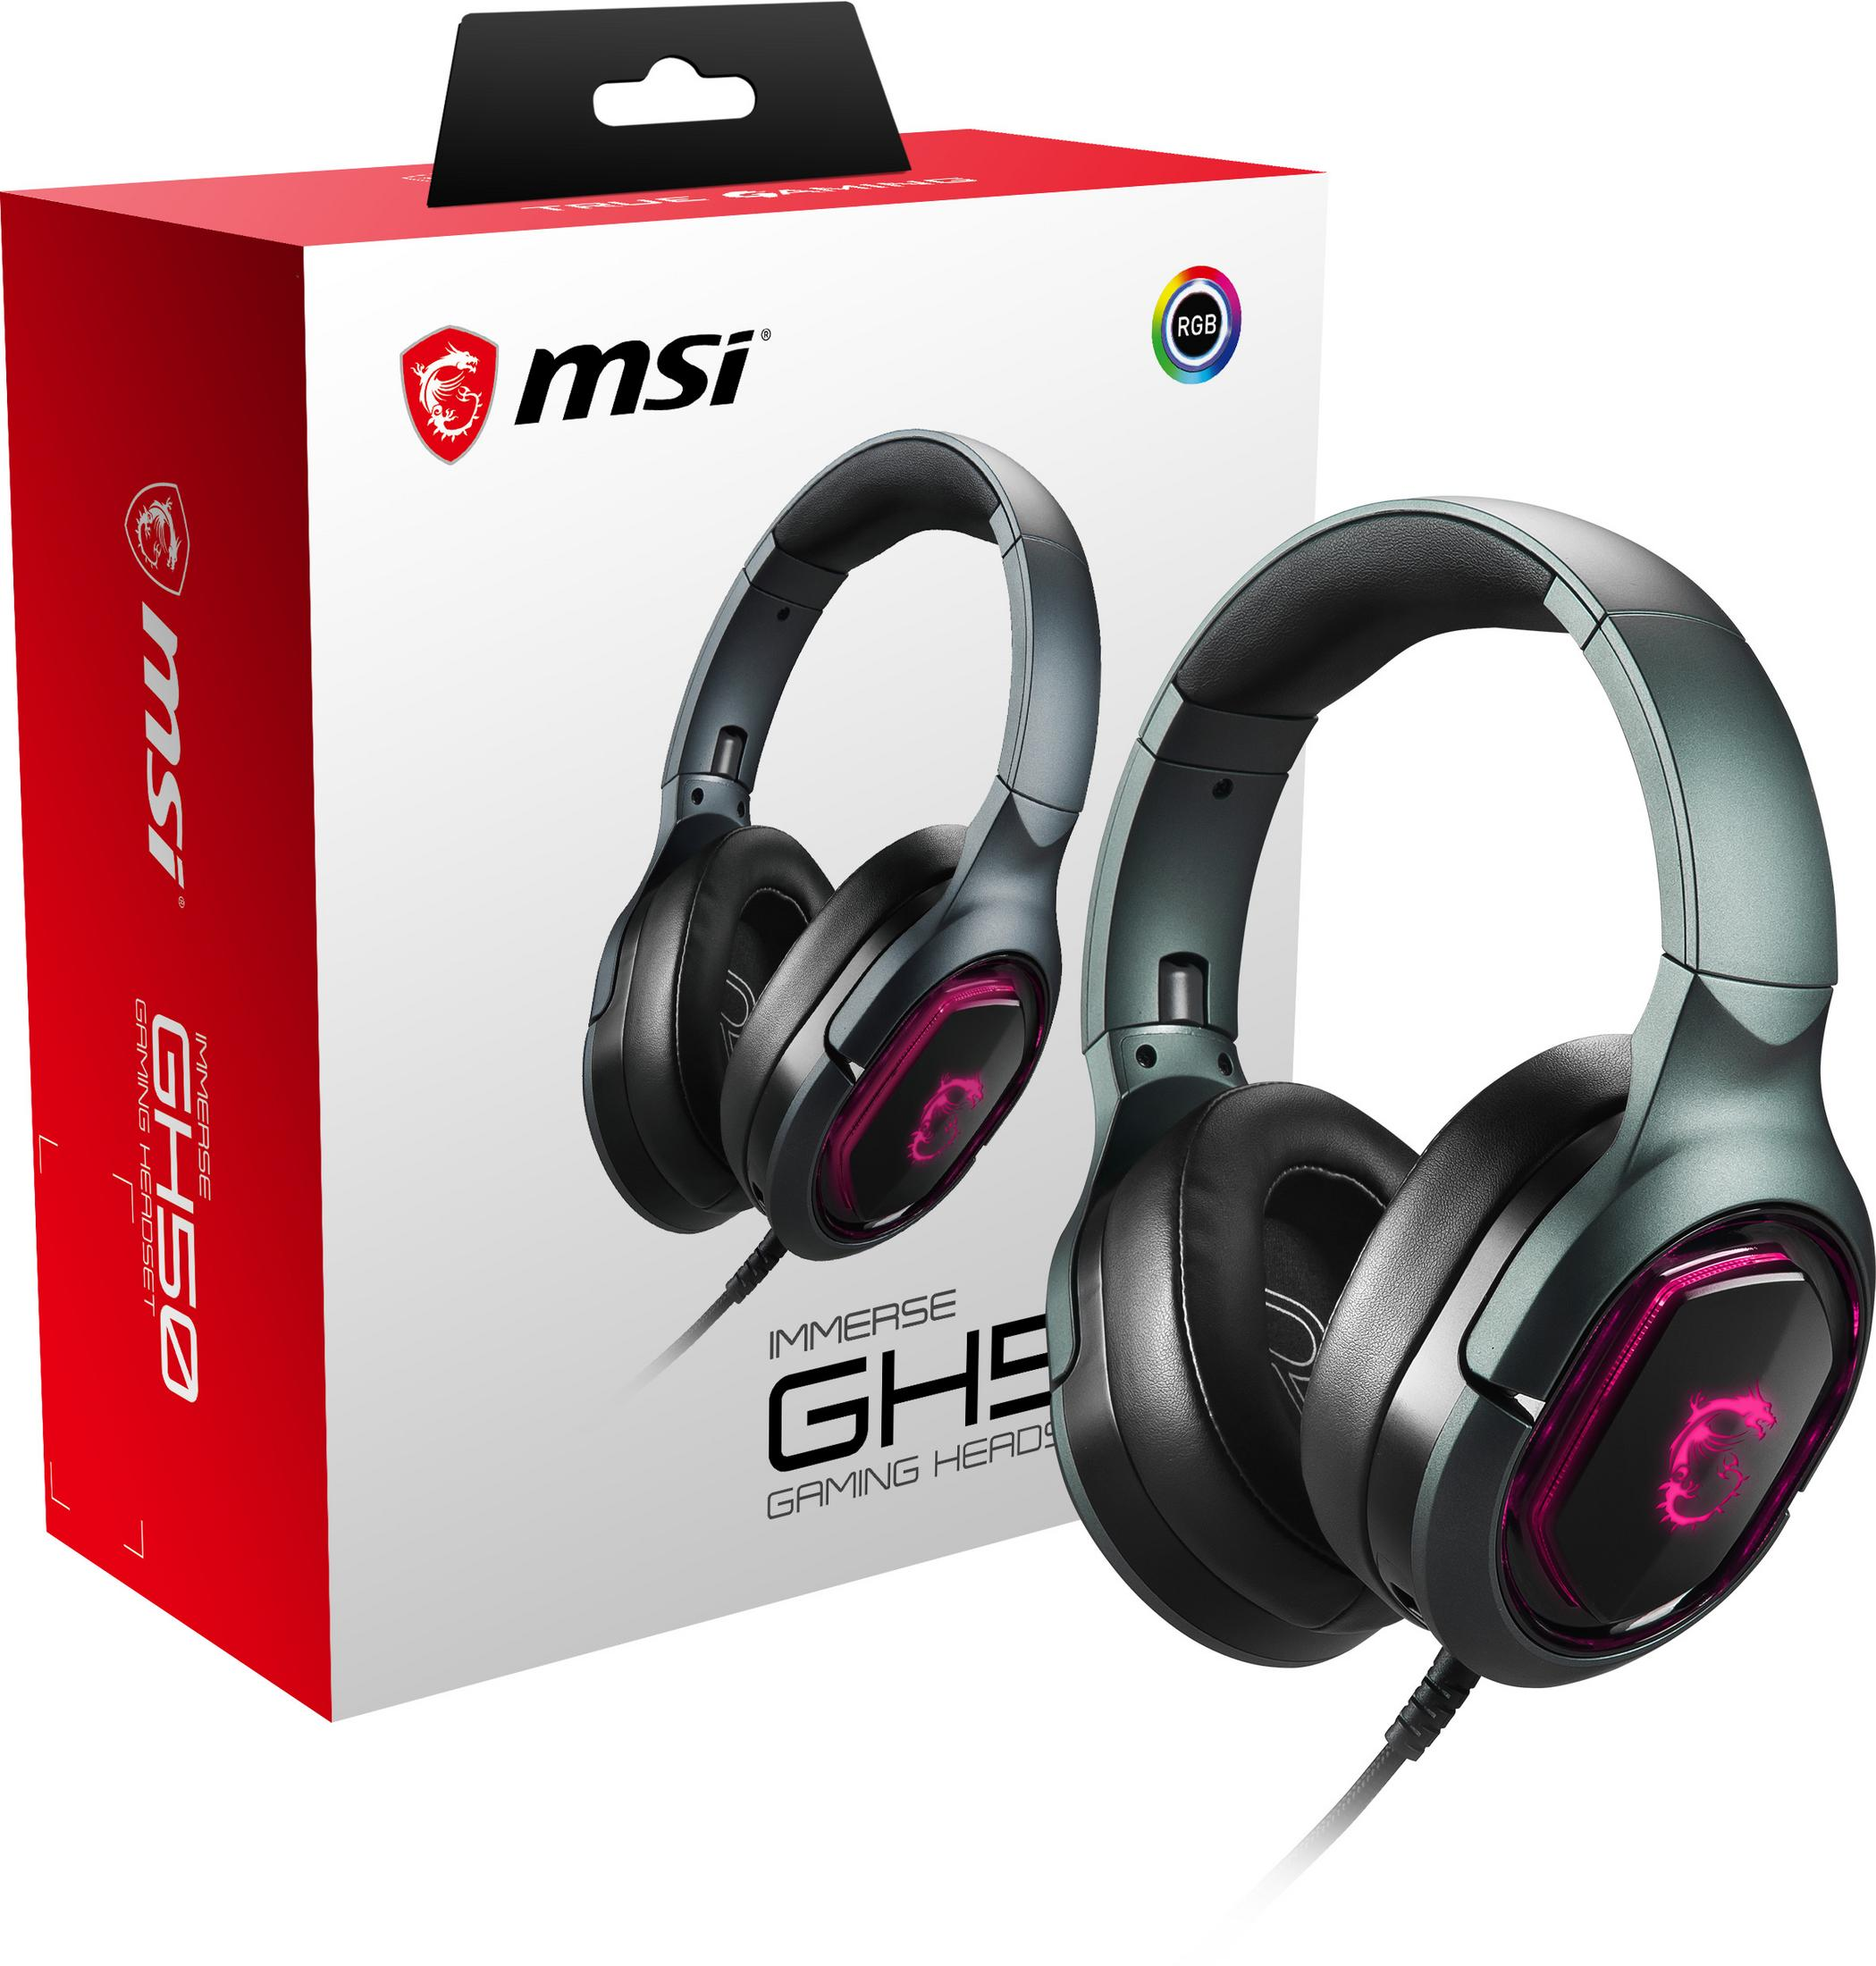 S37-0400020-SV1 Schwarz MSI Gaming Headset GAMING Over-ear GH50 IMMERSE HEADSET,